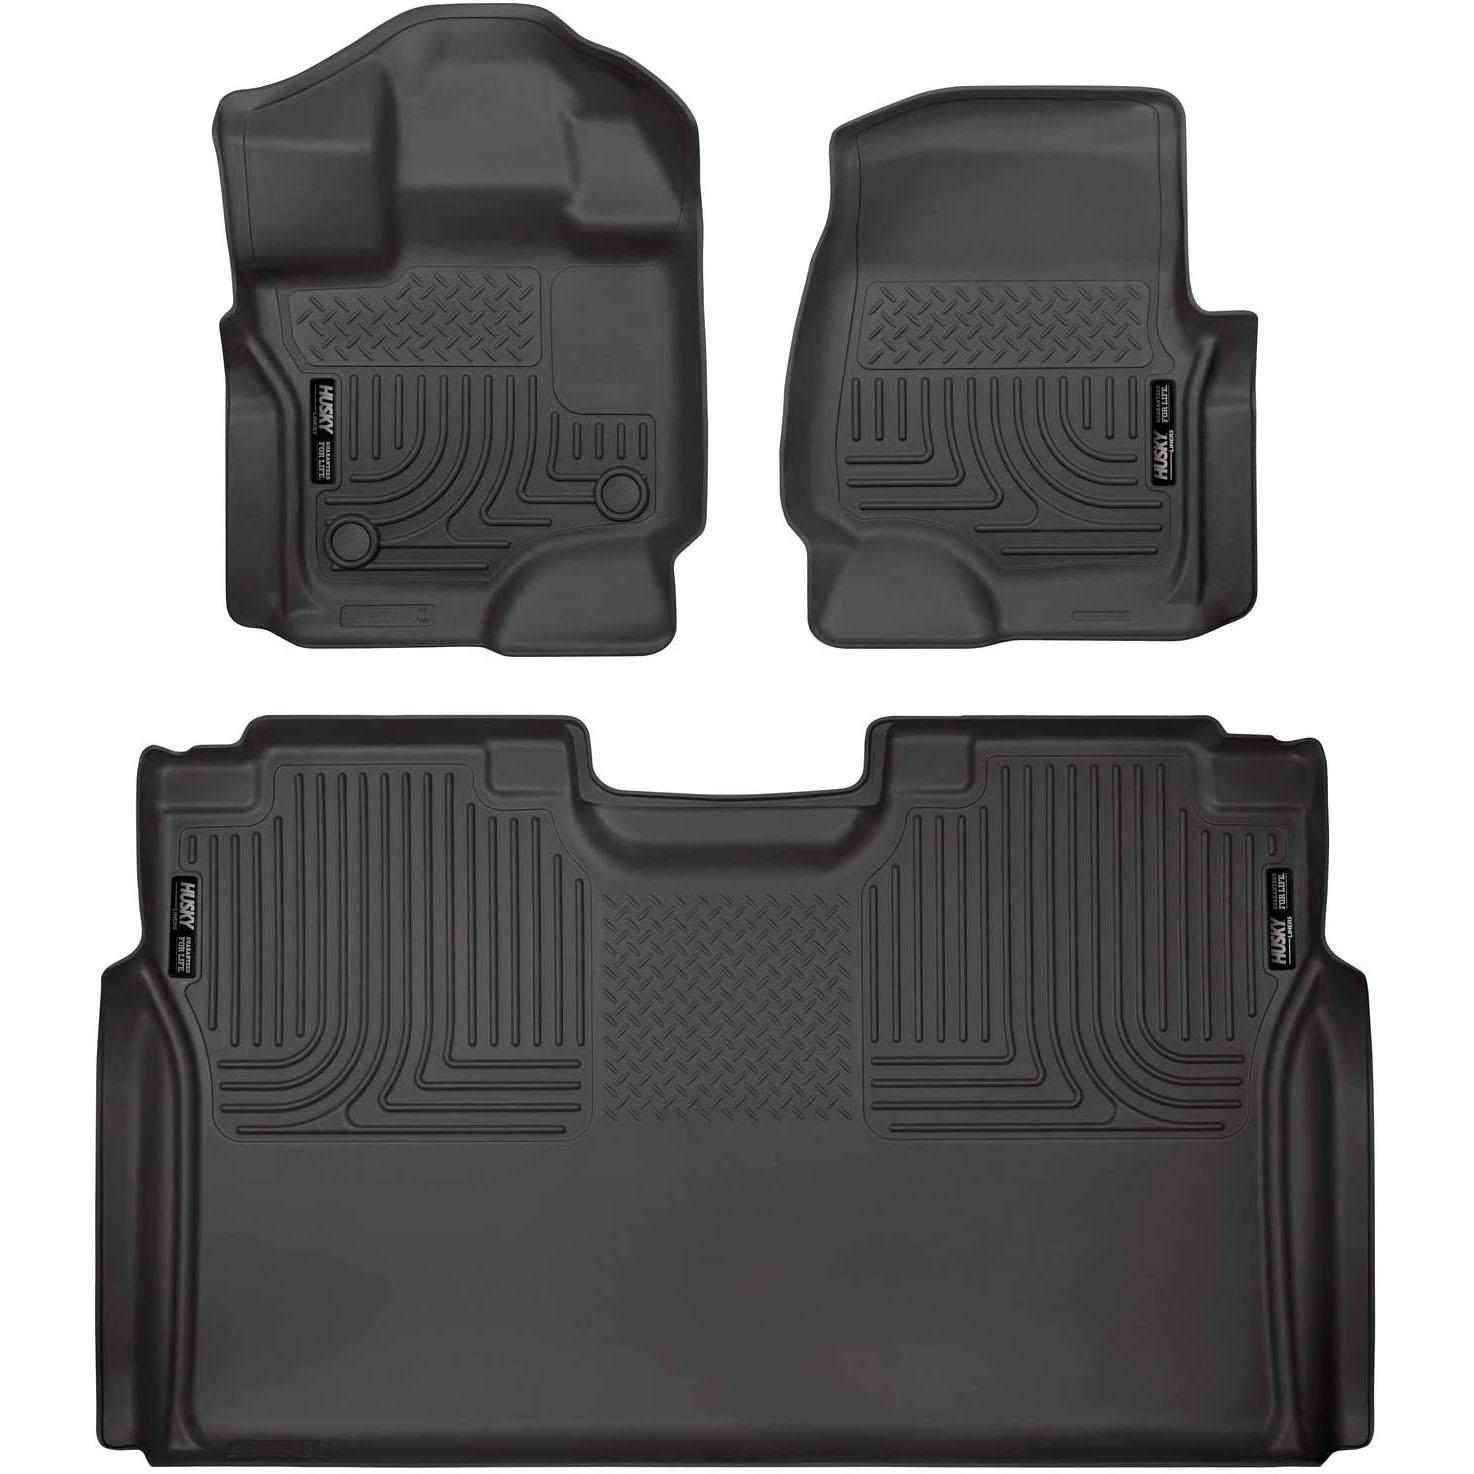 Ford F-150 2015 to 2020 Husky Liners Weatherbeater Floor Mats for $96.06 Shipped